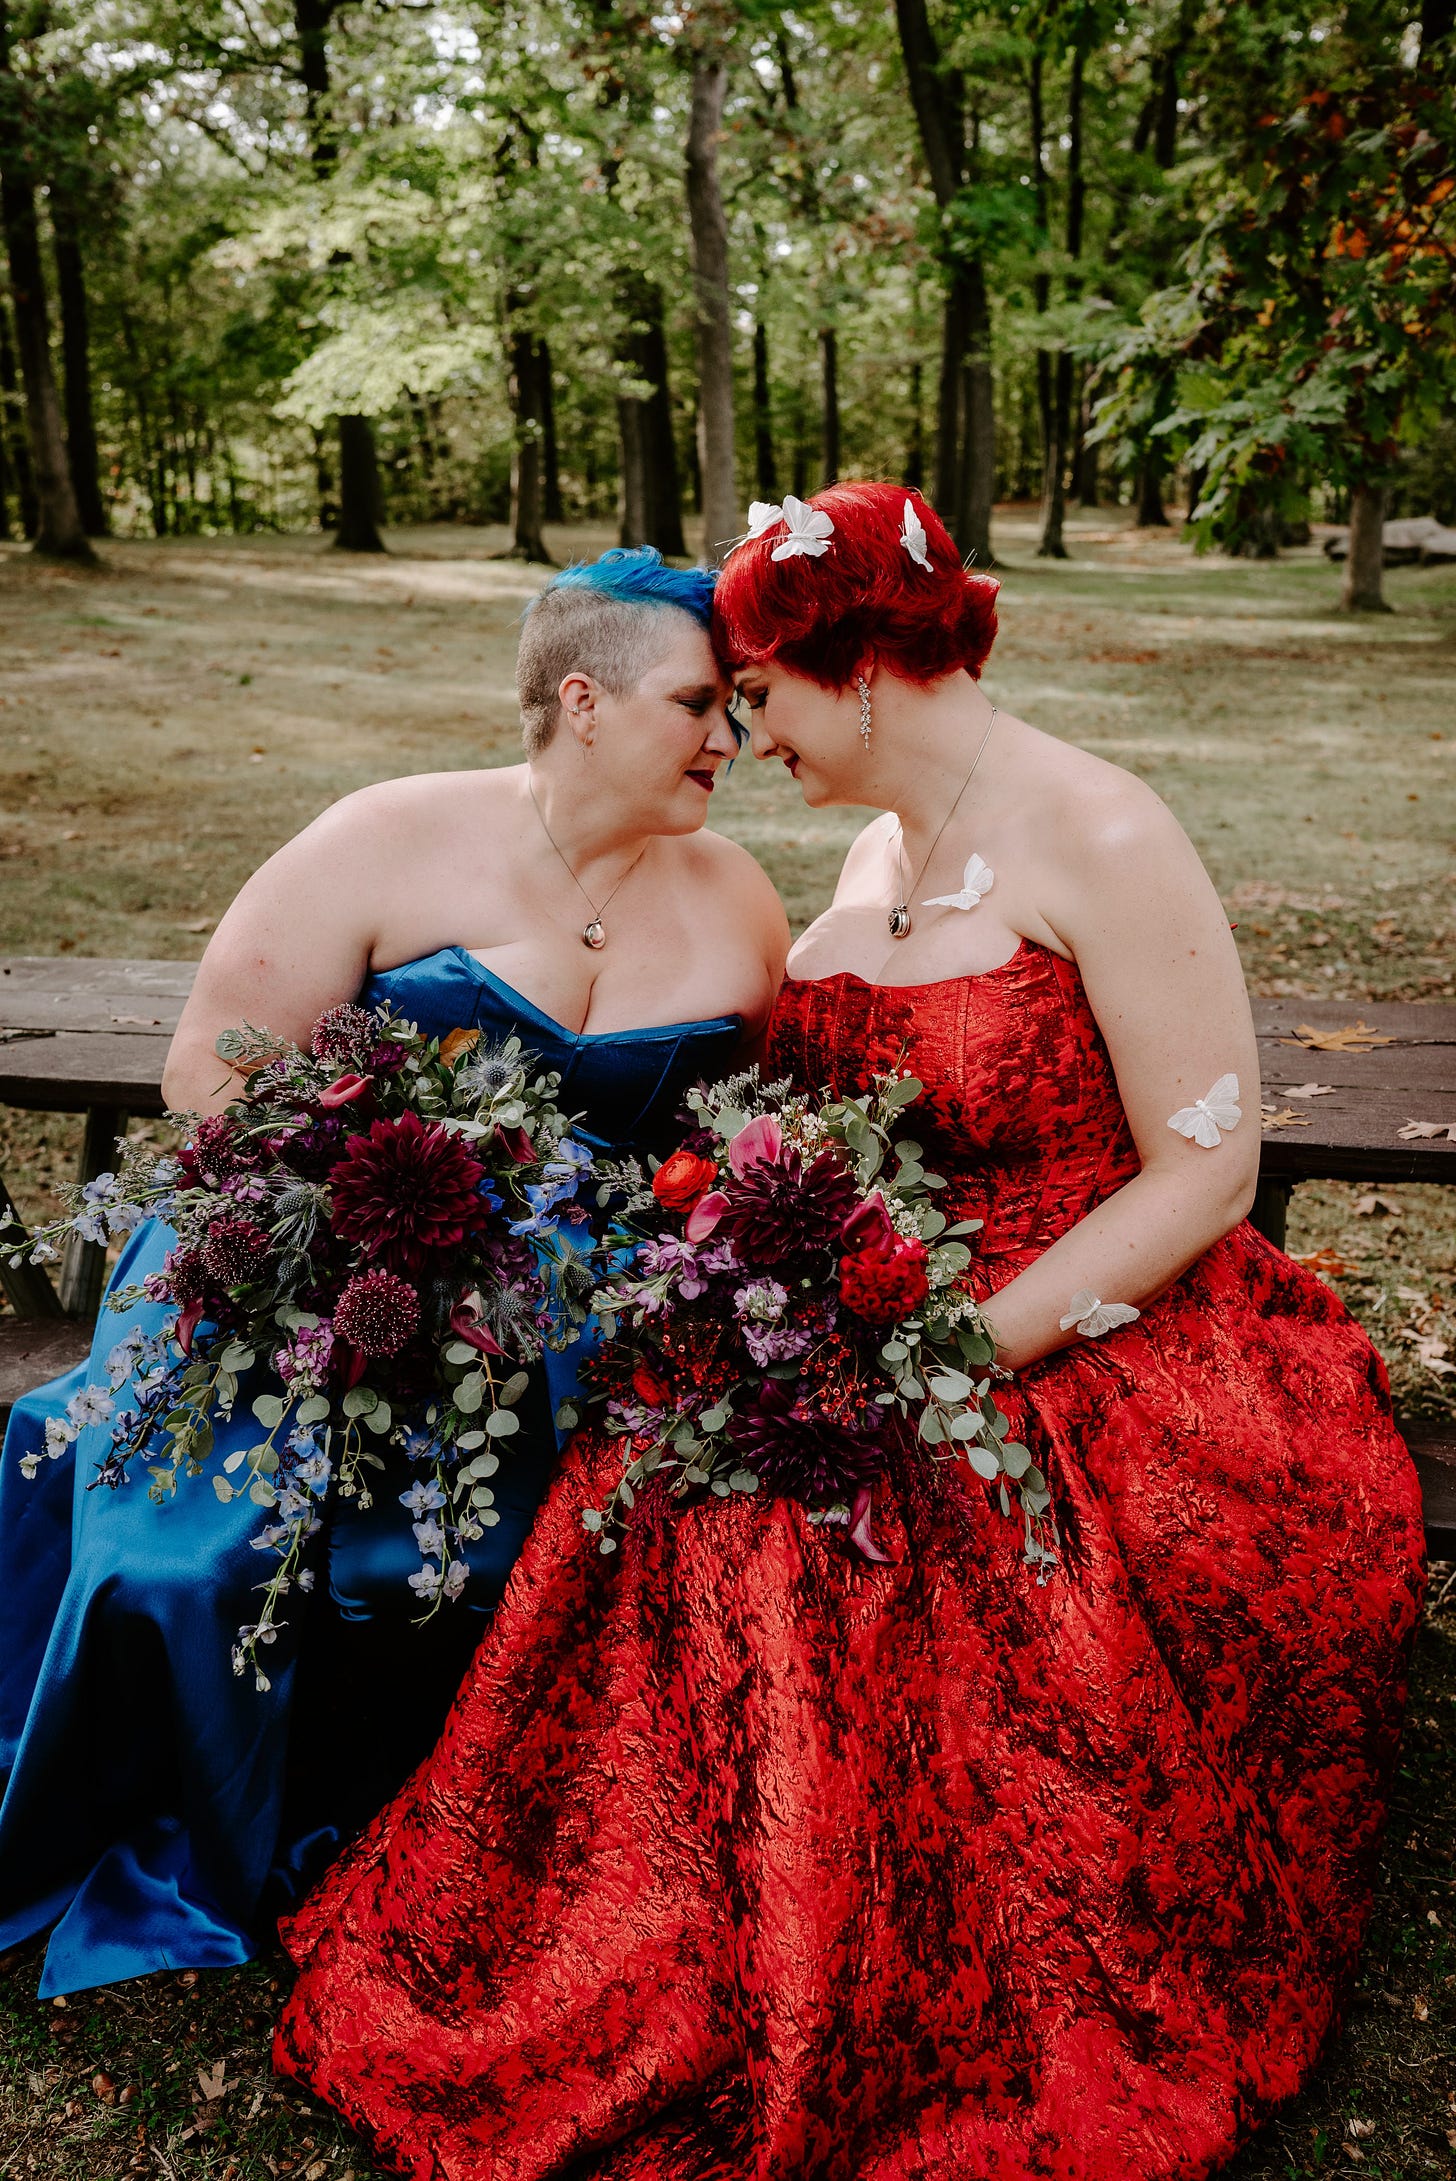 The author and her wife, in red and blue dresses respectively, sit at a picnic table while holding boquets. They rest their foreheads against each other.